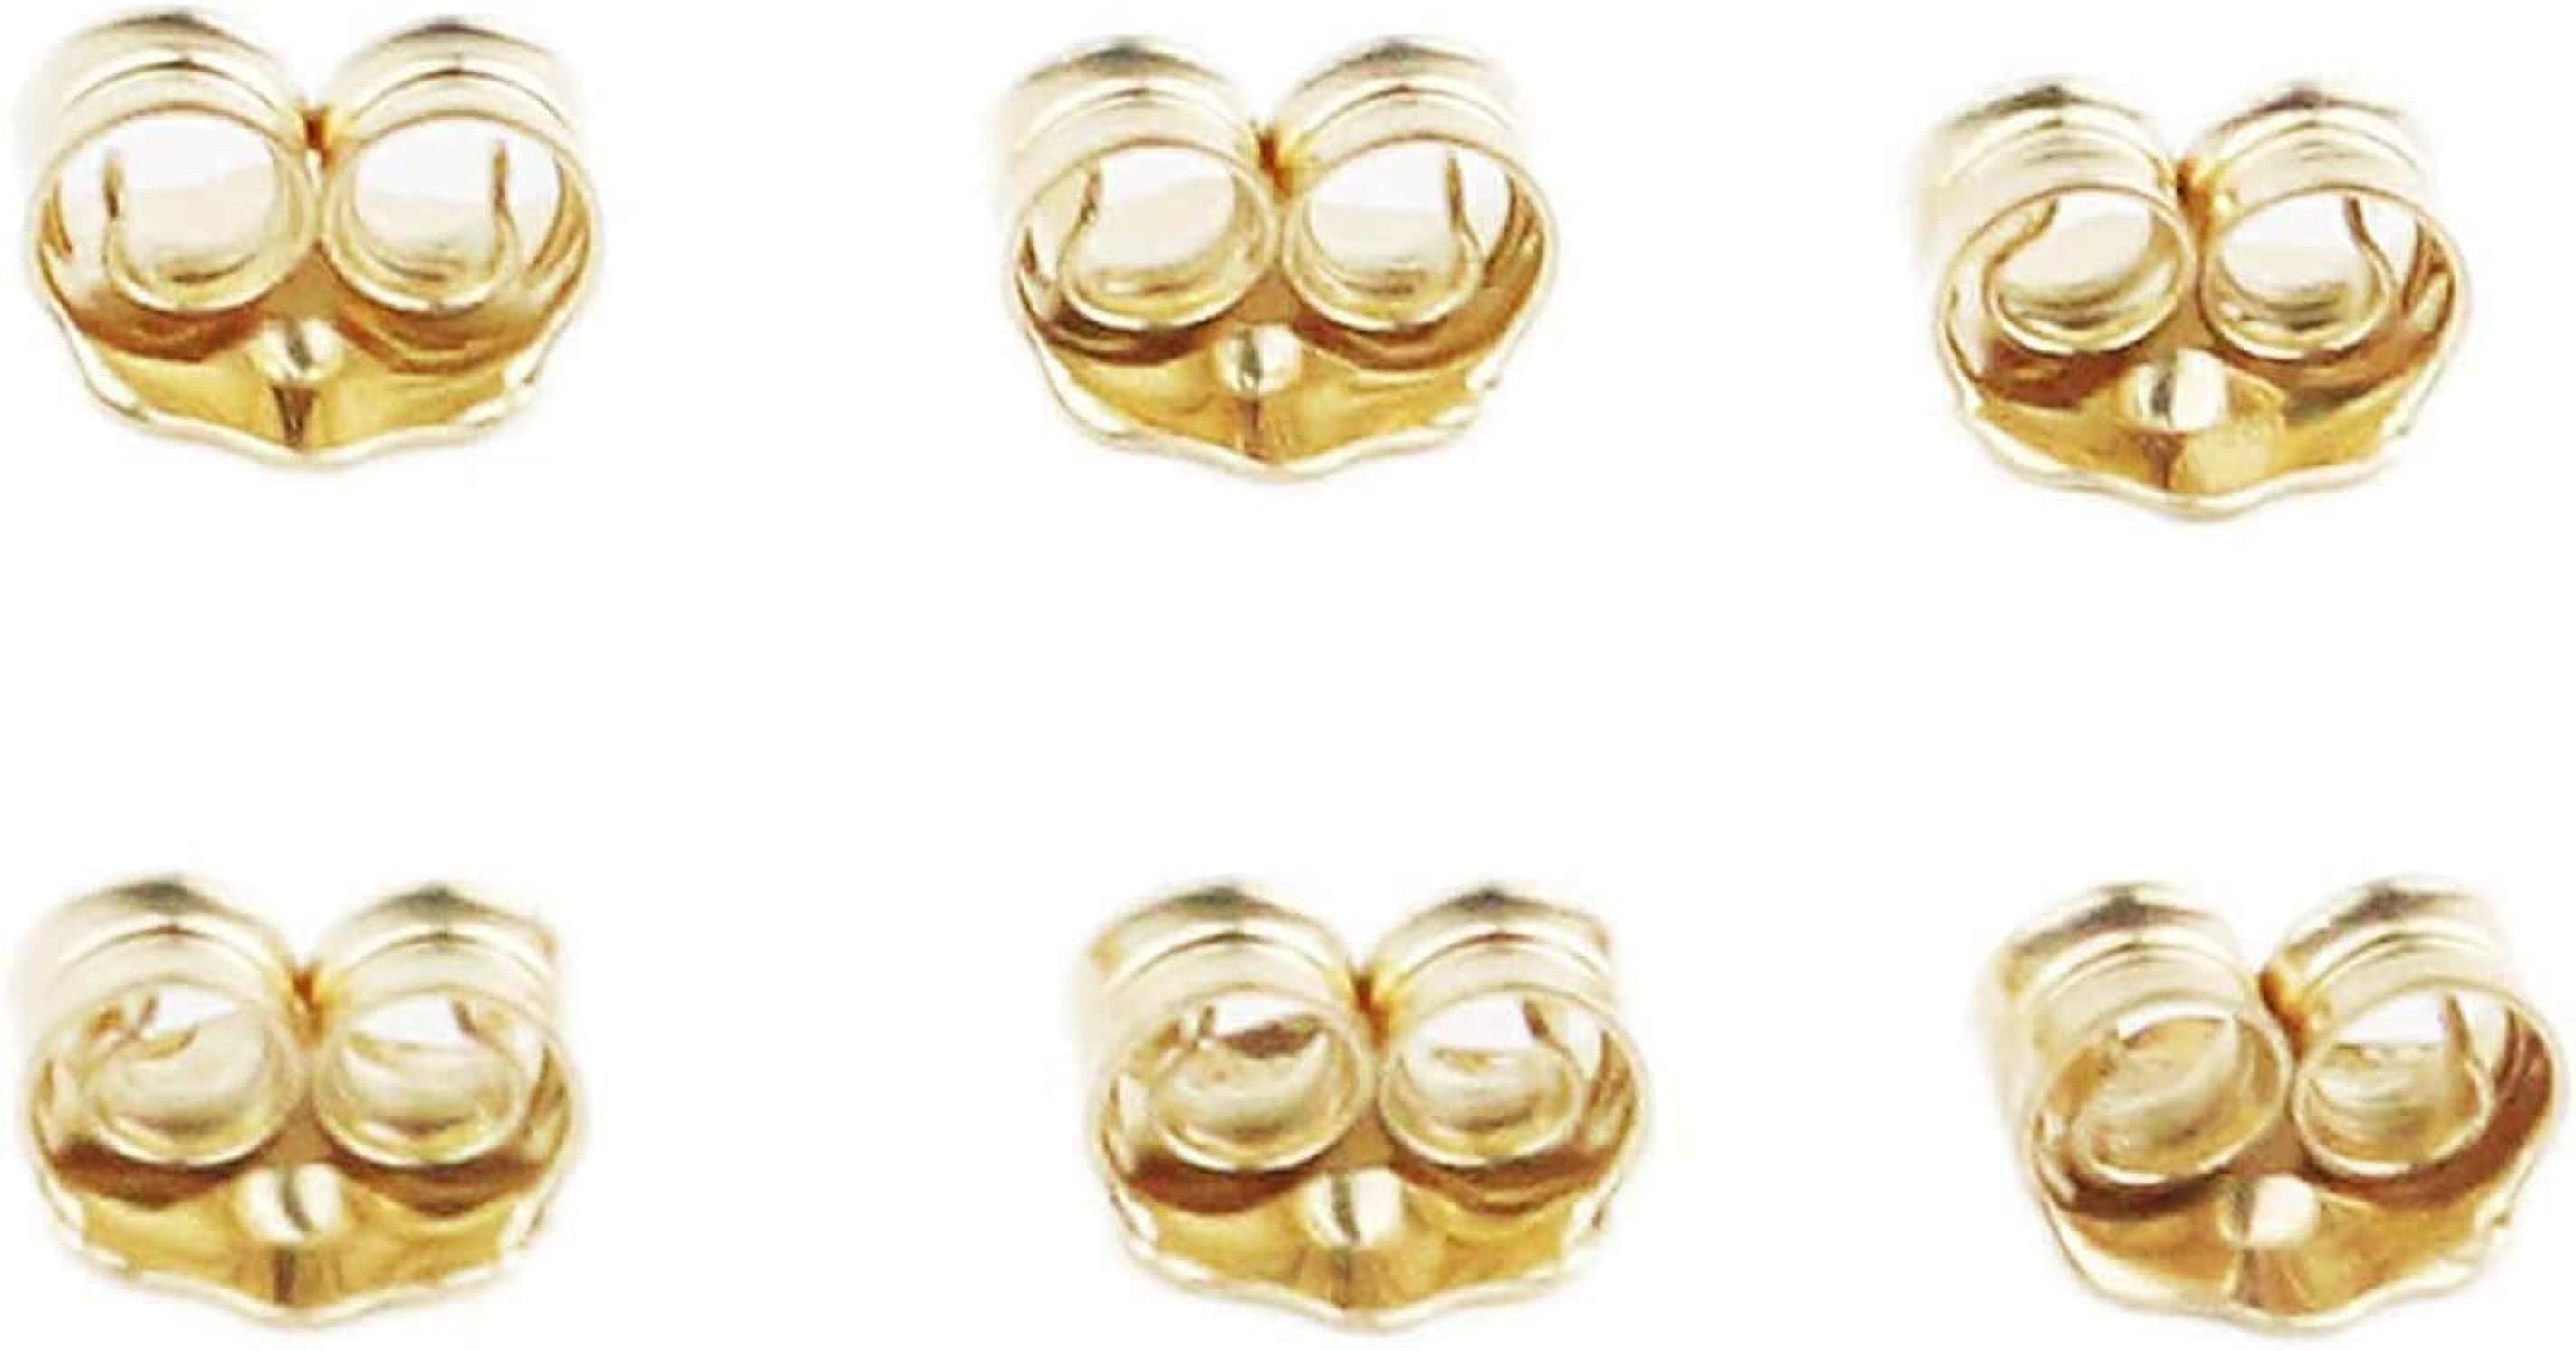 Orgrimmar 14K Gold Earring Backs Yellow Ear Locking for Stud Ear Rings (3  Pairs)